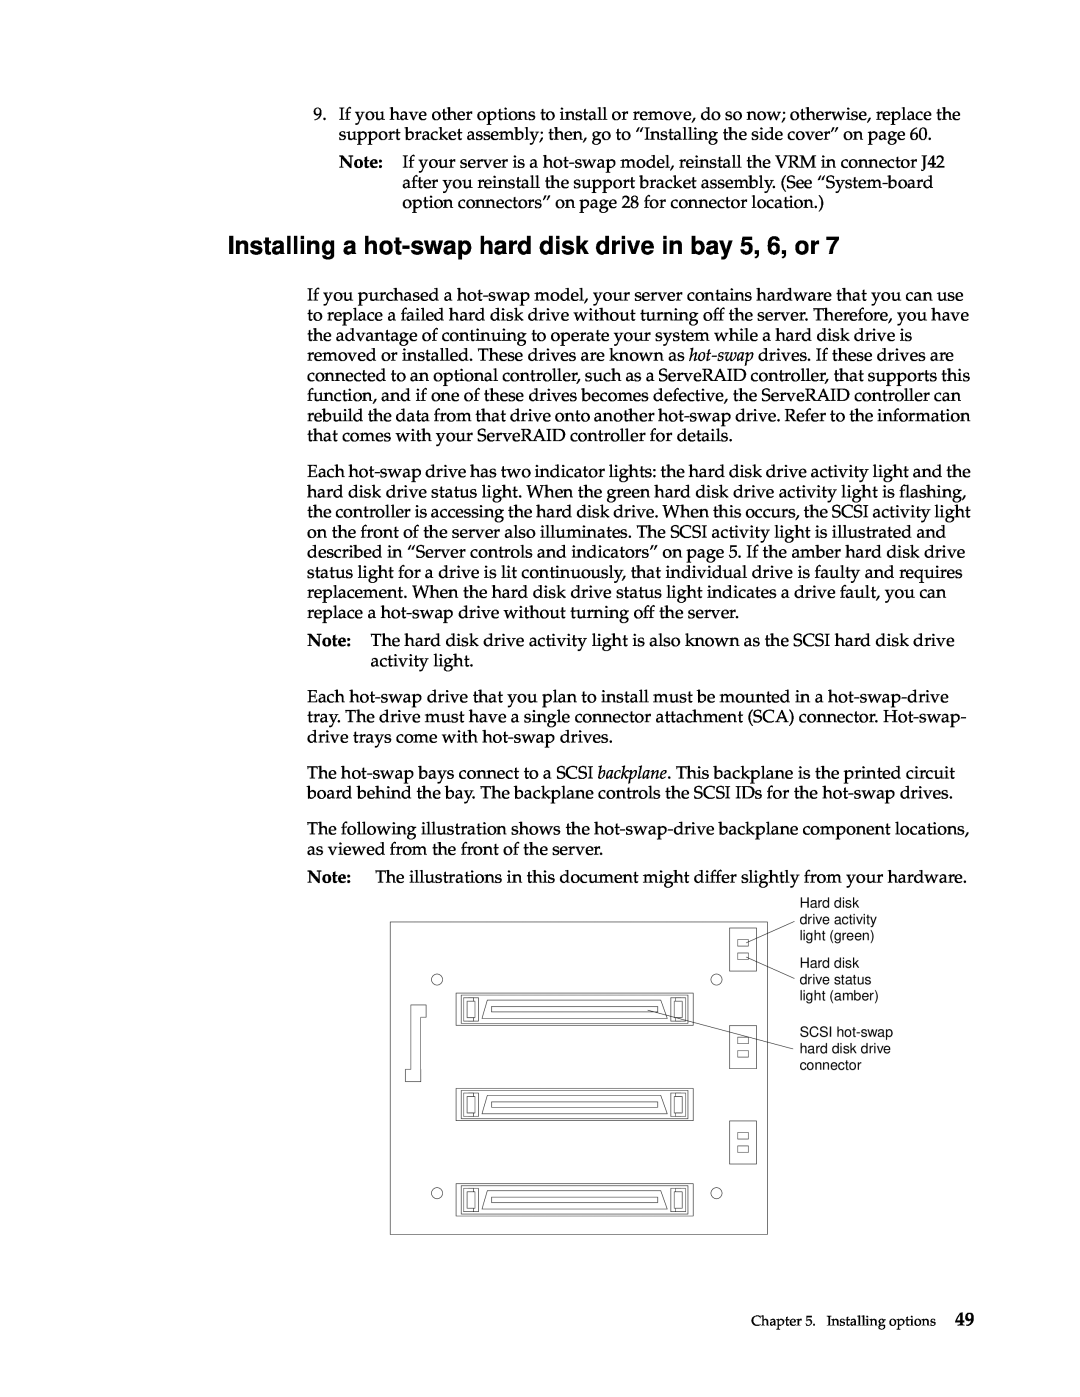 IBM 220 manual Installing a hot-swap hard disk drive in bay 5, 6, or, Hard disk drive activity light green 